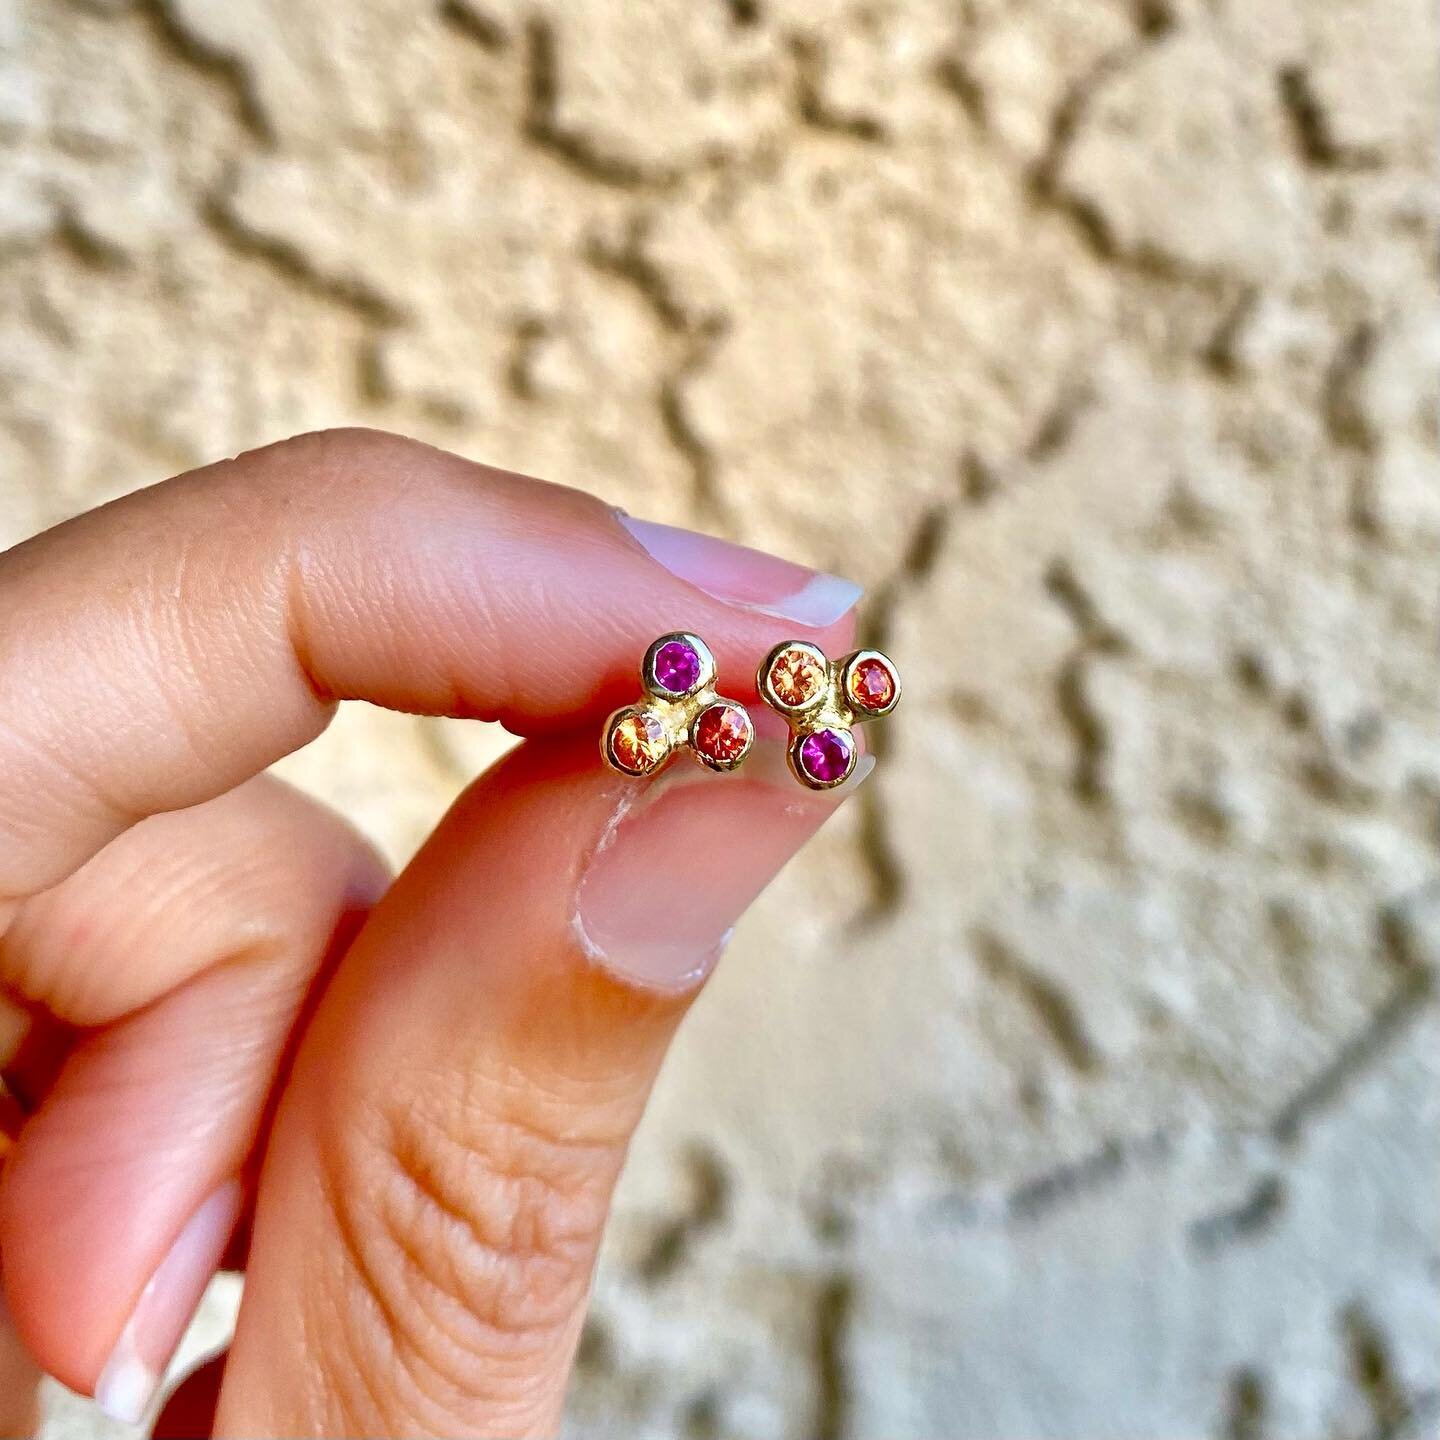 The Sunset Bubbles! 🌅✨

Clusters of mixed peachy-pink sapphires for those days where your jewelry layers call for warm tones and a delicate style!

They&rsquo;re definitely brightening up these May gray mornings we&rsquo;ve been having. Perfect litt